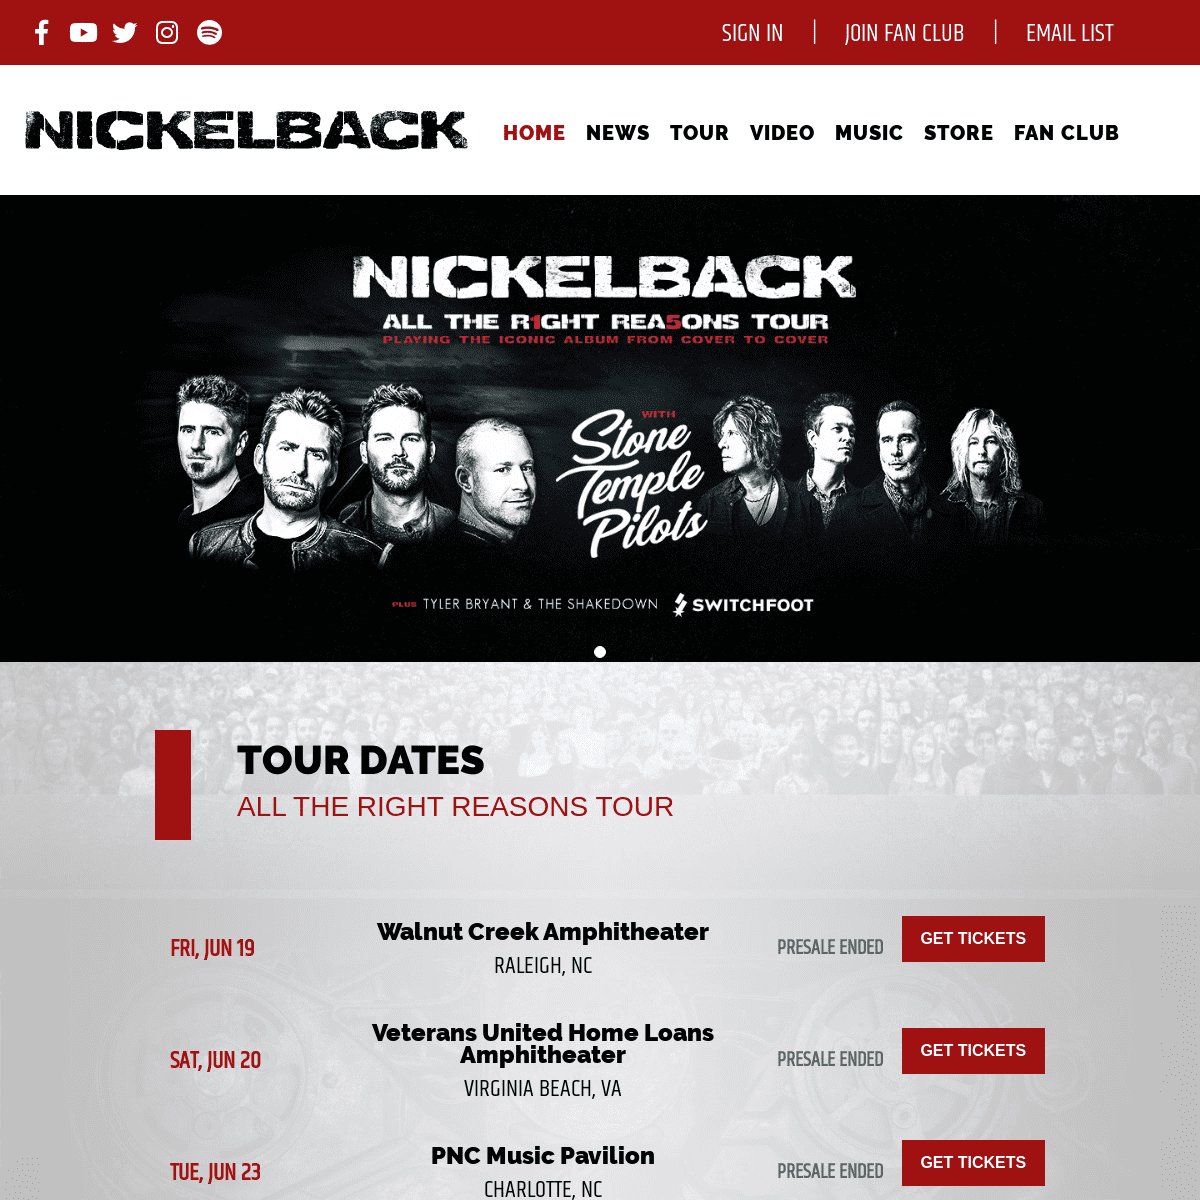 A complete backup of nickelback.com